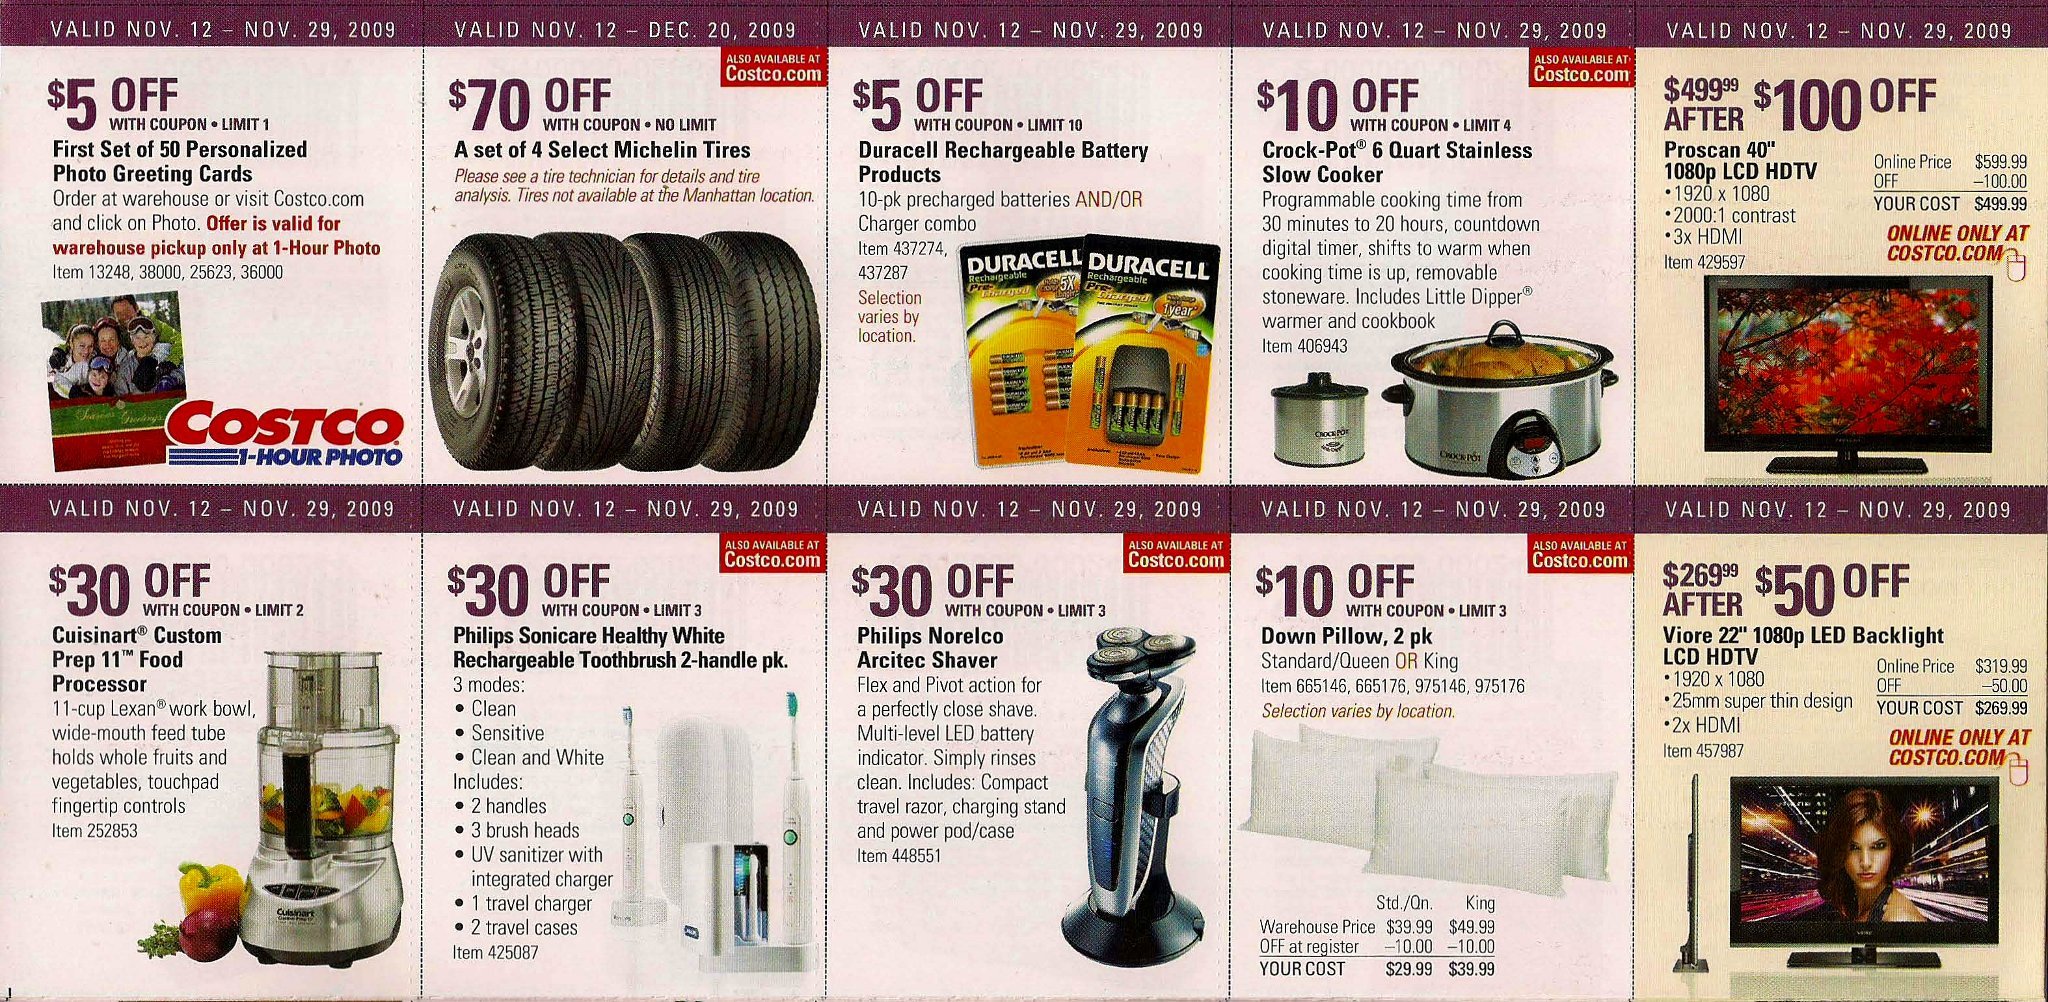 Coupon book page 1 in full-size.